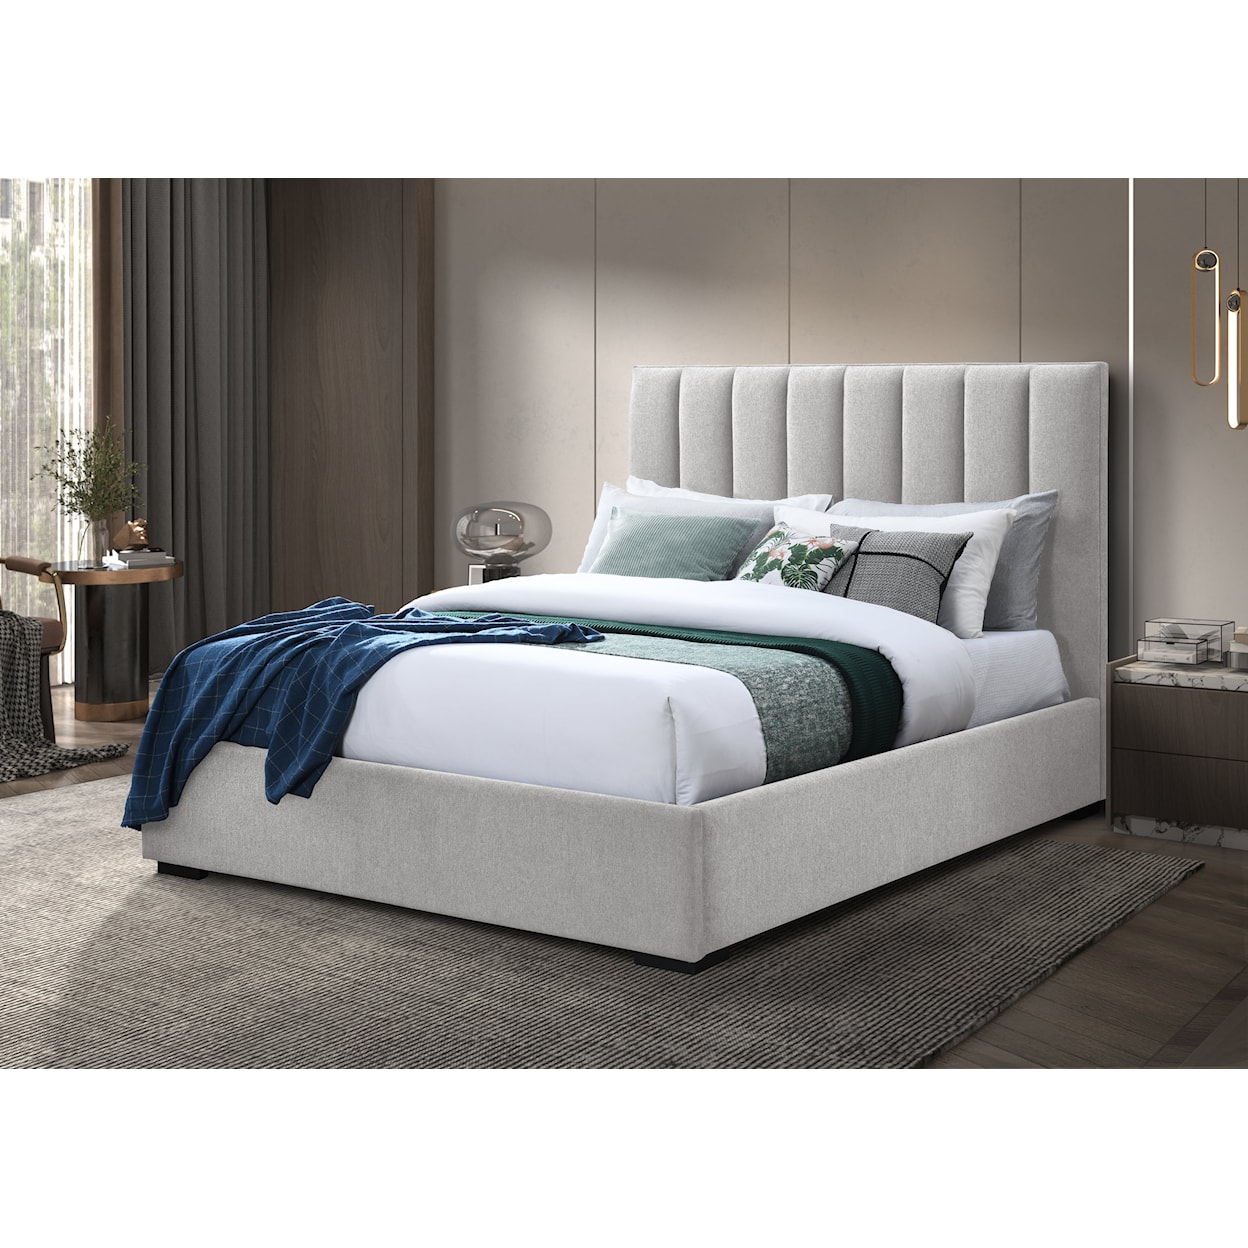 Lifestyle 9432A Upholstered Bed - King